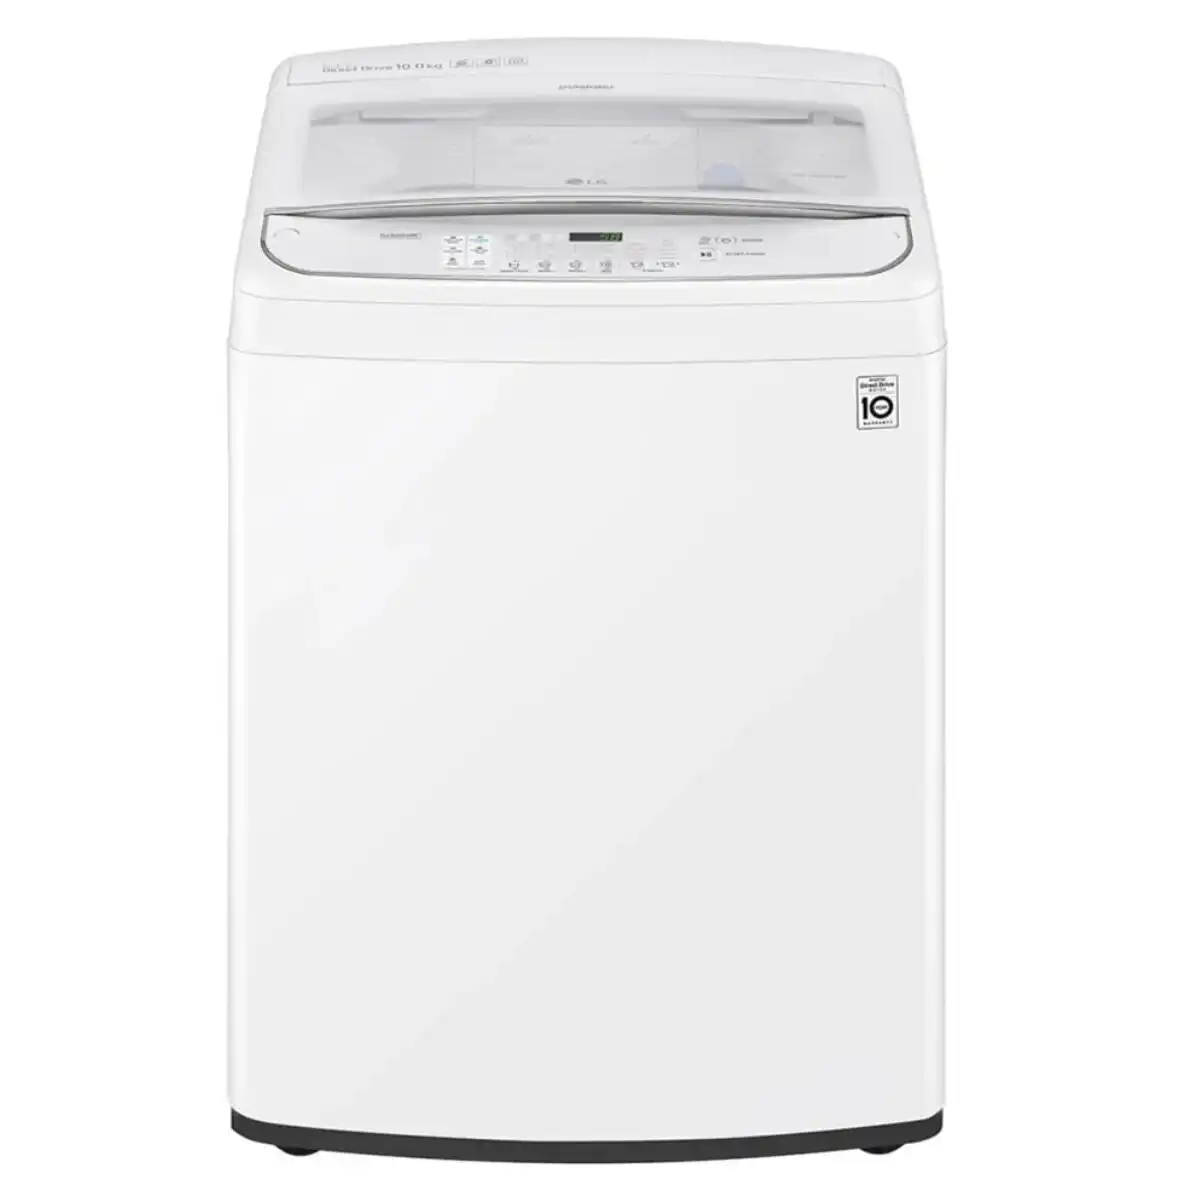 LG 10kg Top Load Washing Machine with Direct Drive